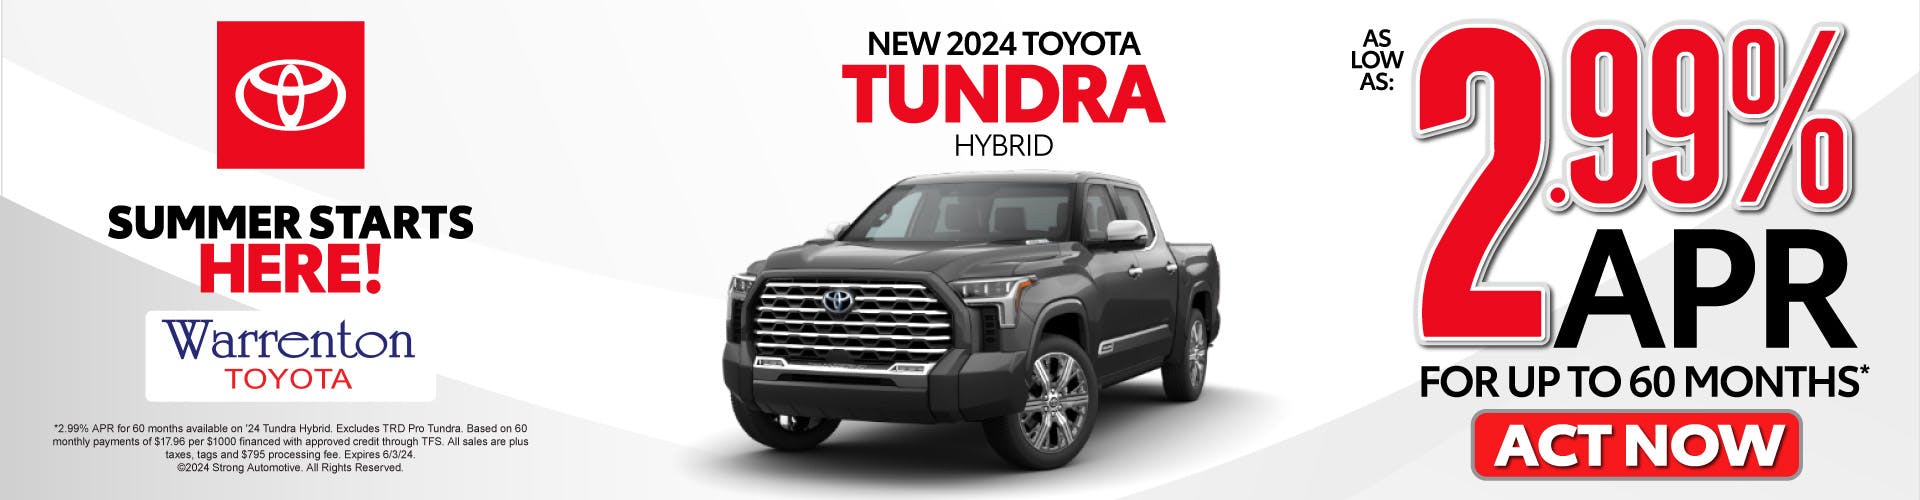 New 2024 Toyota Tundra Hybrid – As Low as 2.99% APR for up to 60 months* – Act Now